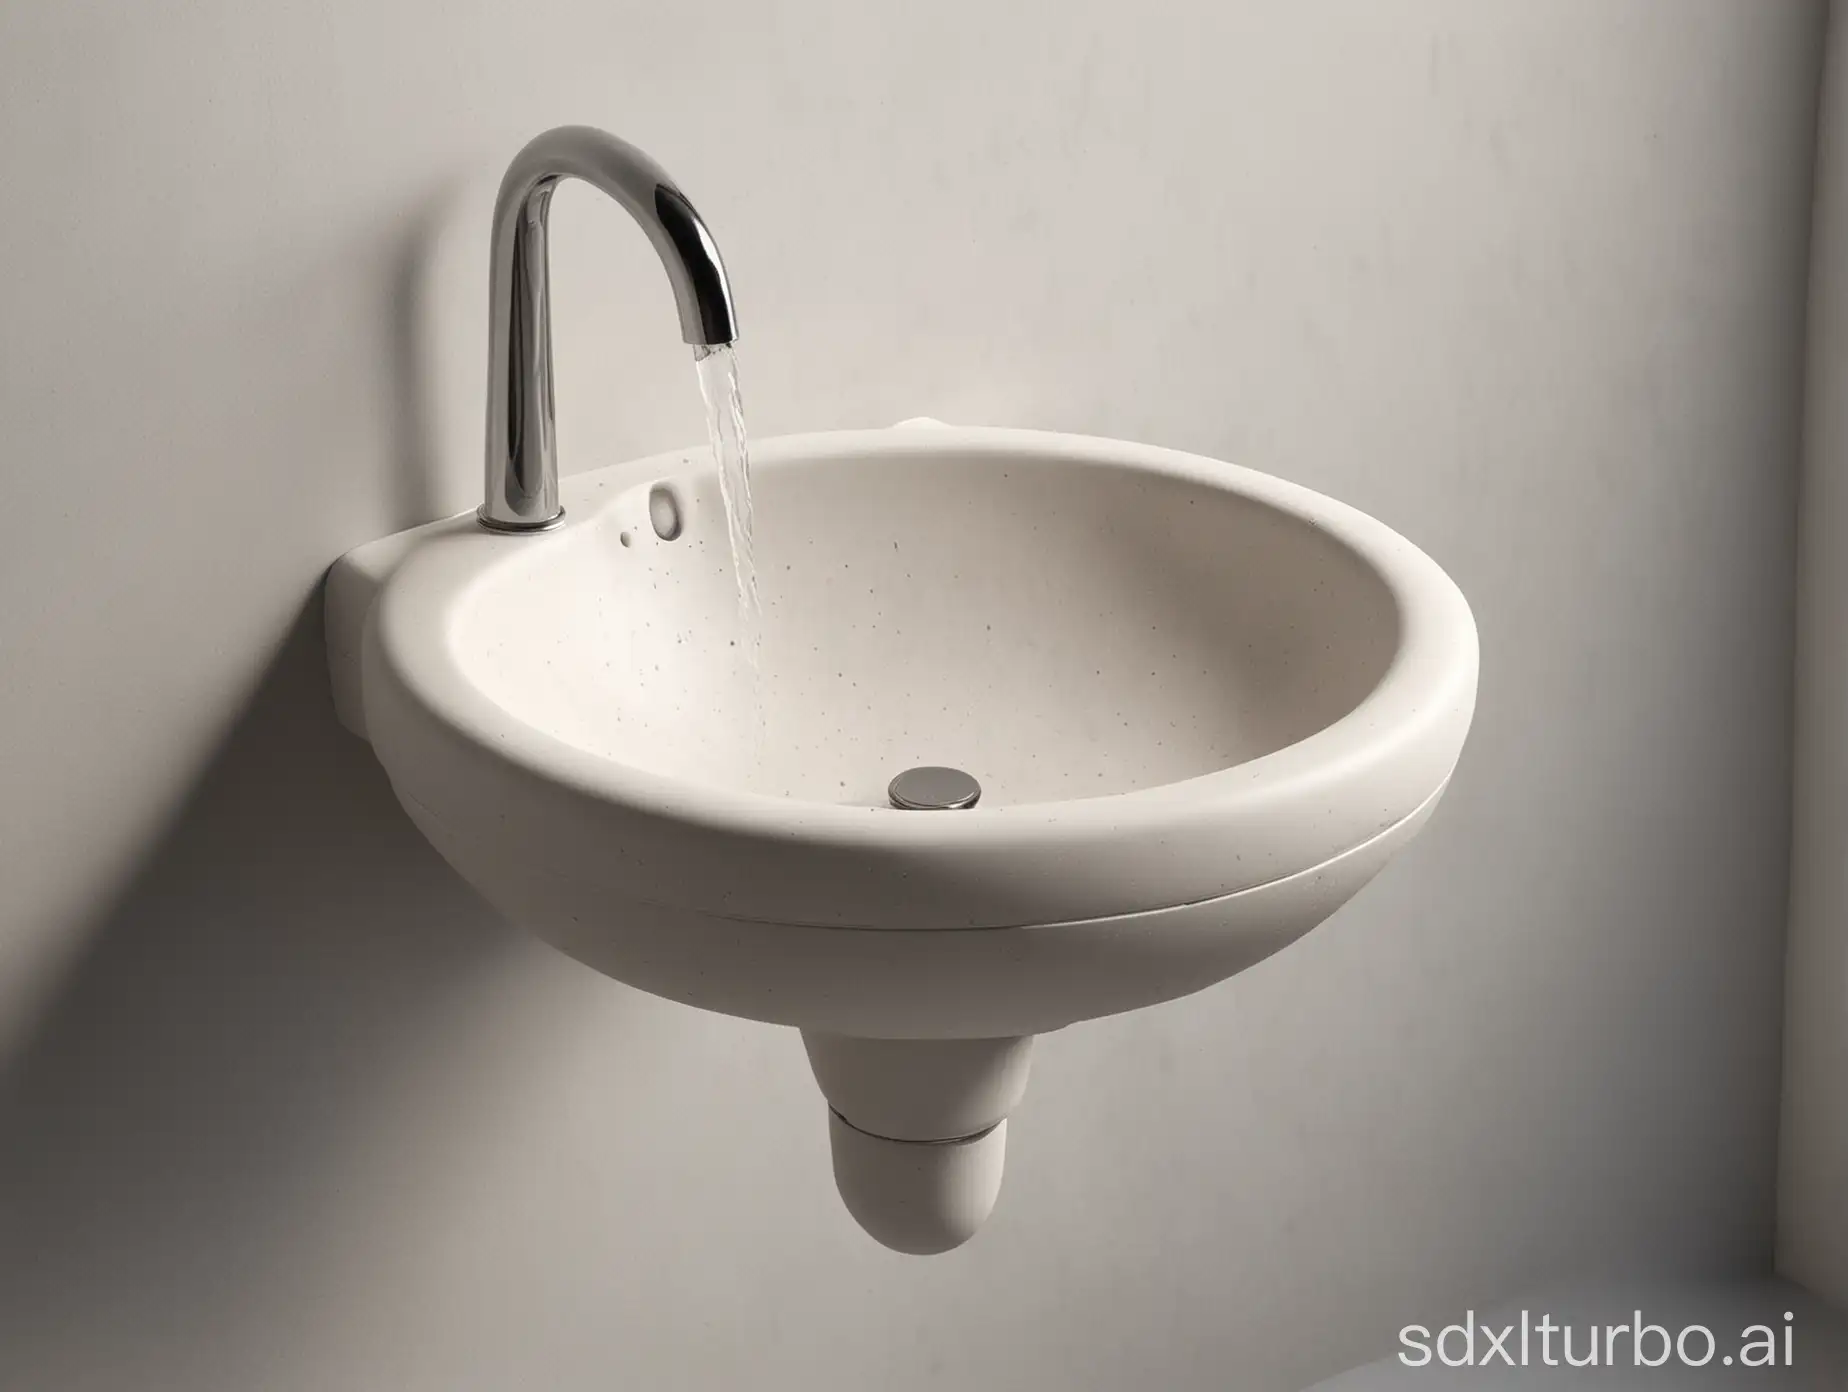 Help me design a sustainable hand basin, this hand basin uses a ceramic-like material, while the bottom of the hand basin uses a rubber-like substance, which can be adjusted in shape to change the capacity of the hand basin, thereby achieving water saving expectations.